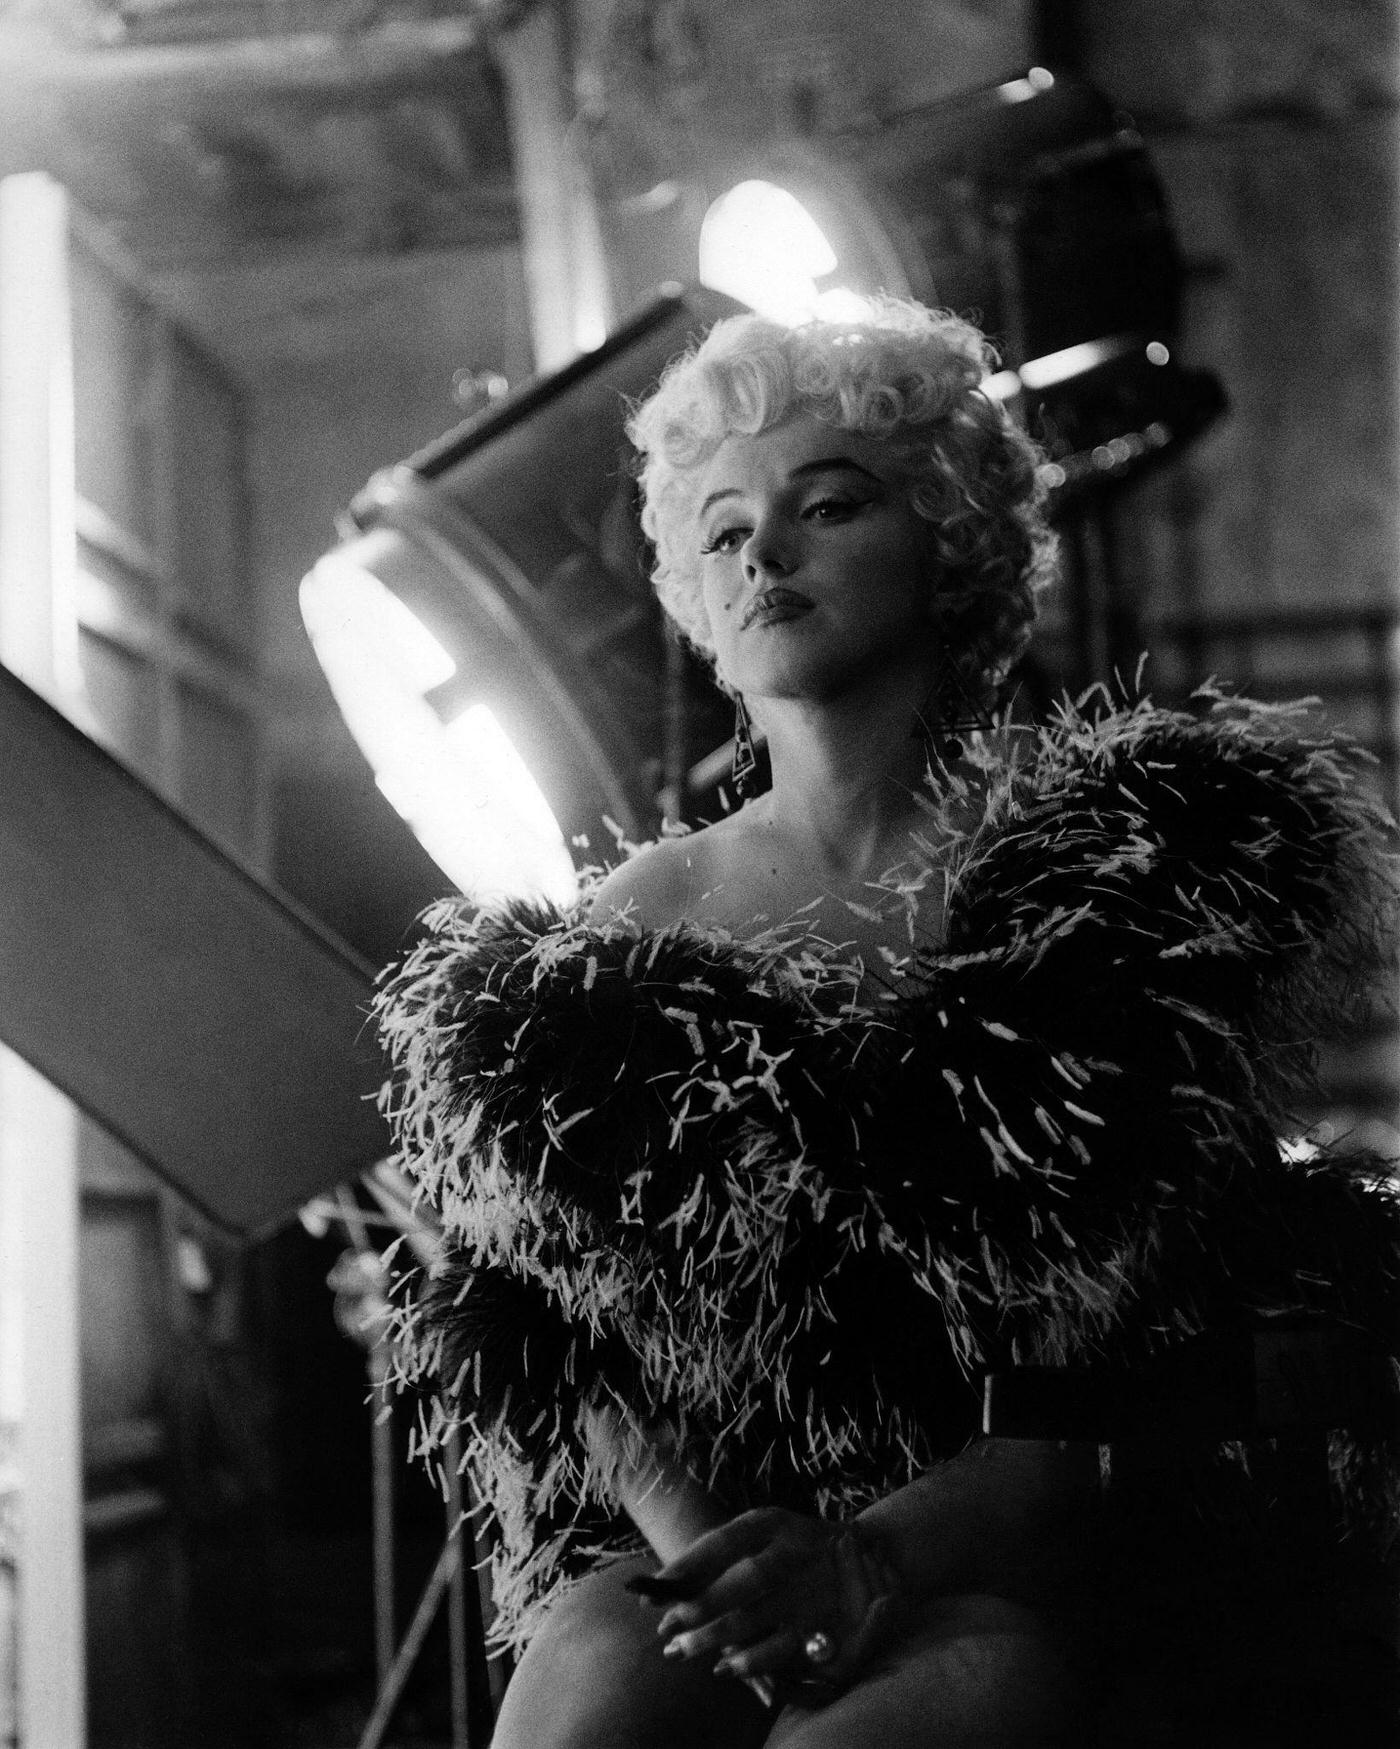 Marilyn Monroe wearing a feather boa in front of film set lights in 1954 during the filming of "The Seven Year Itch" in Los Angeles